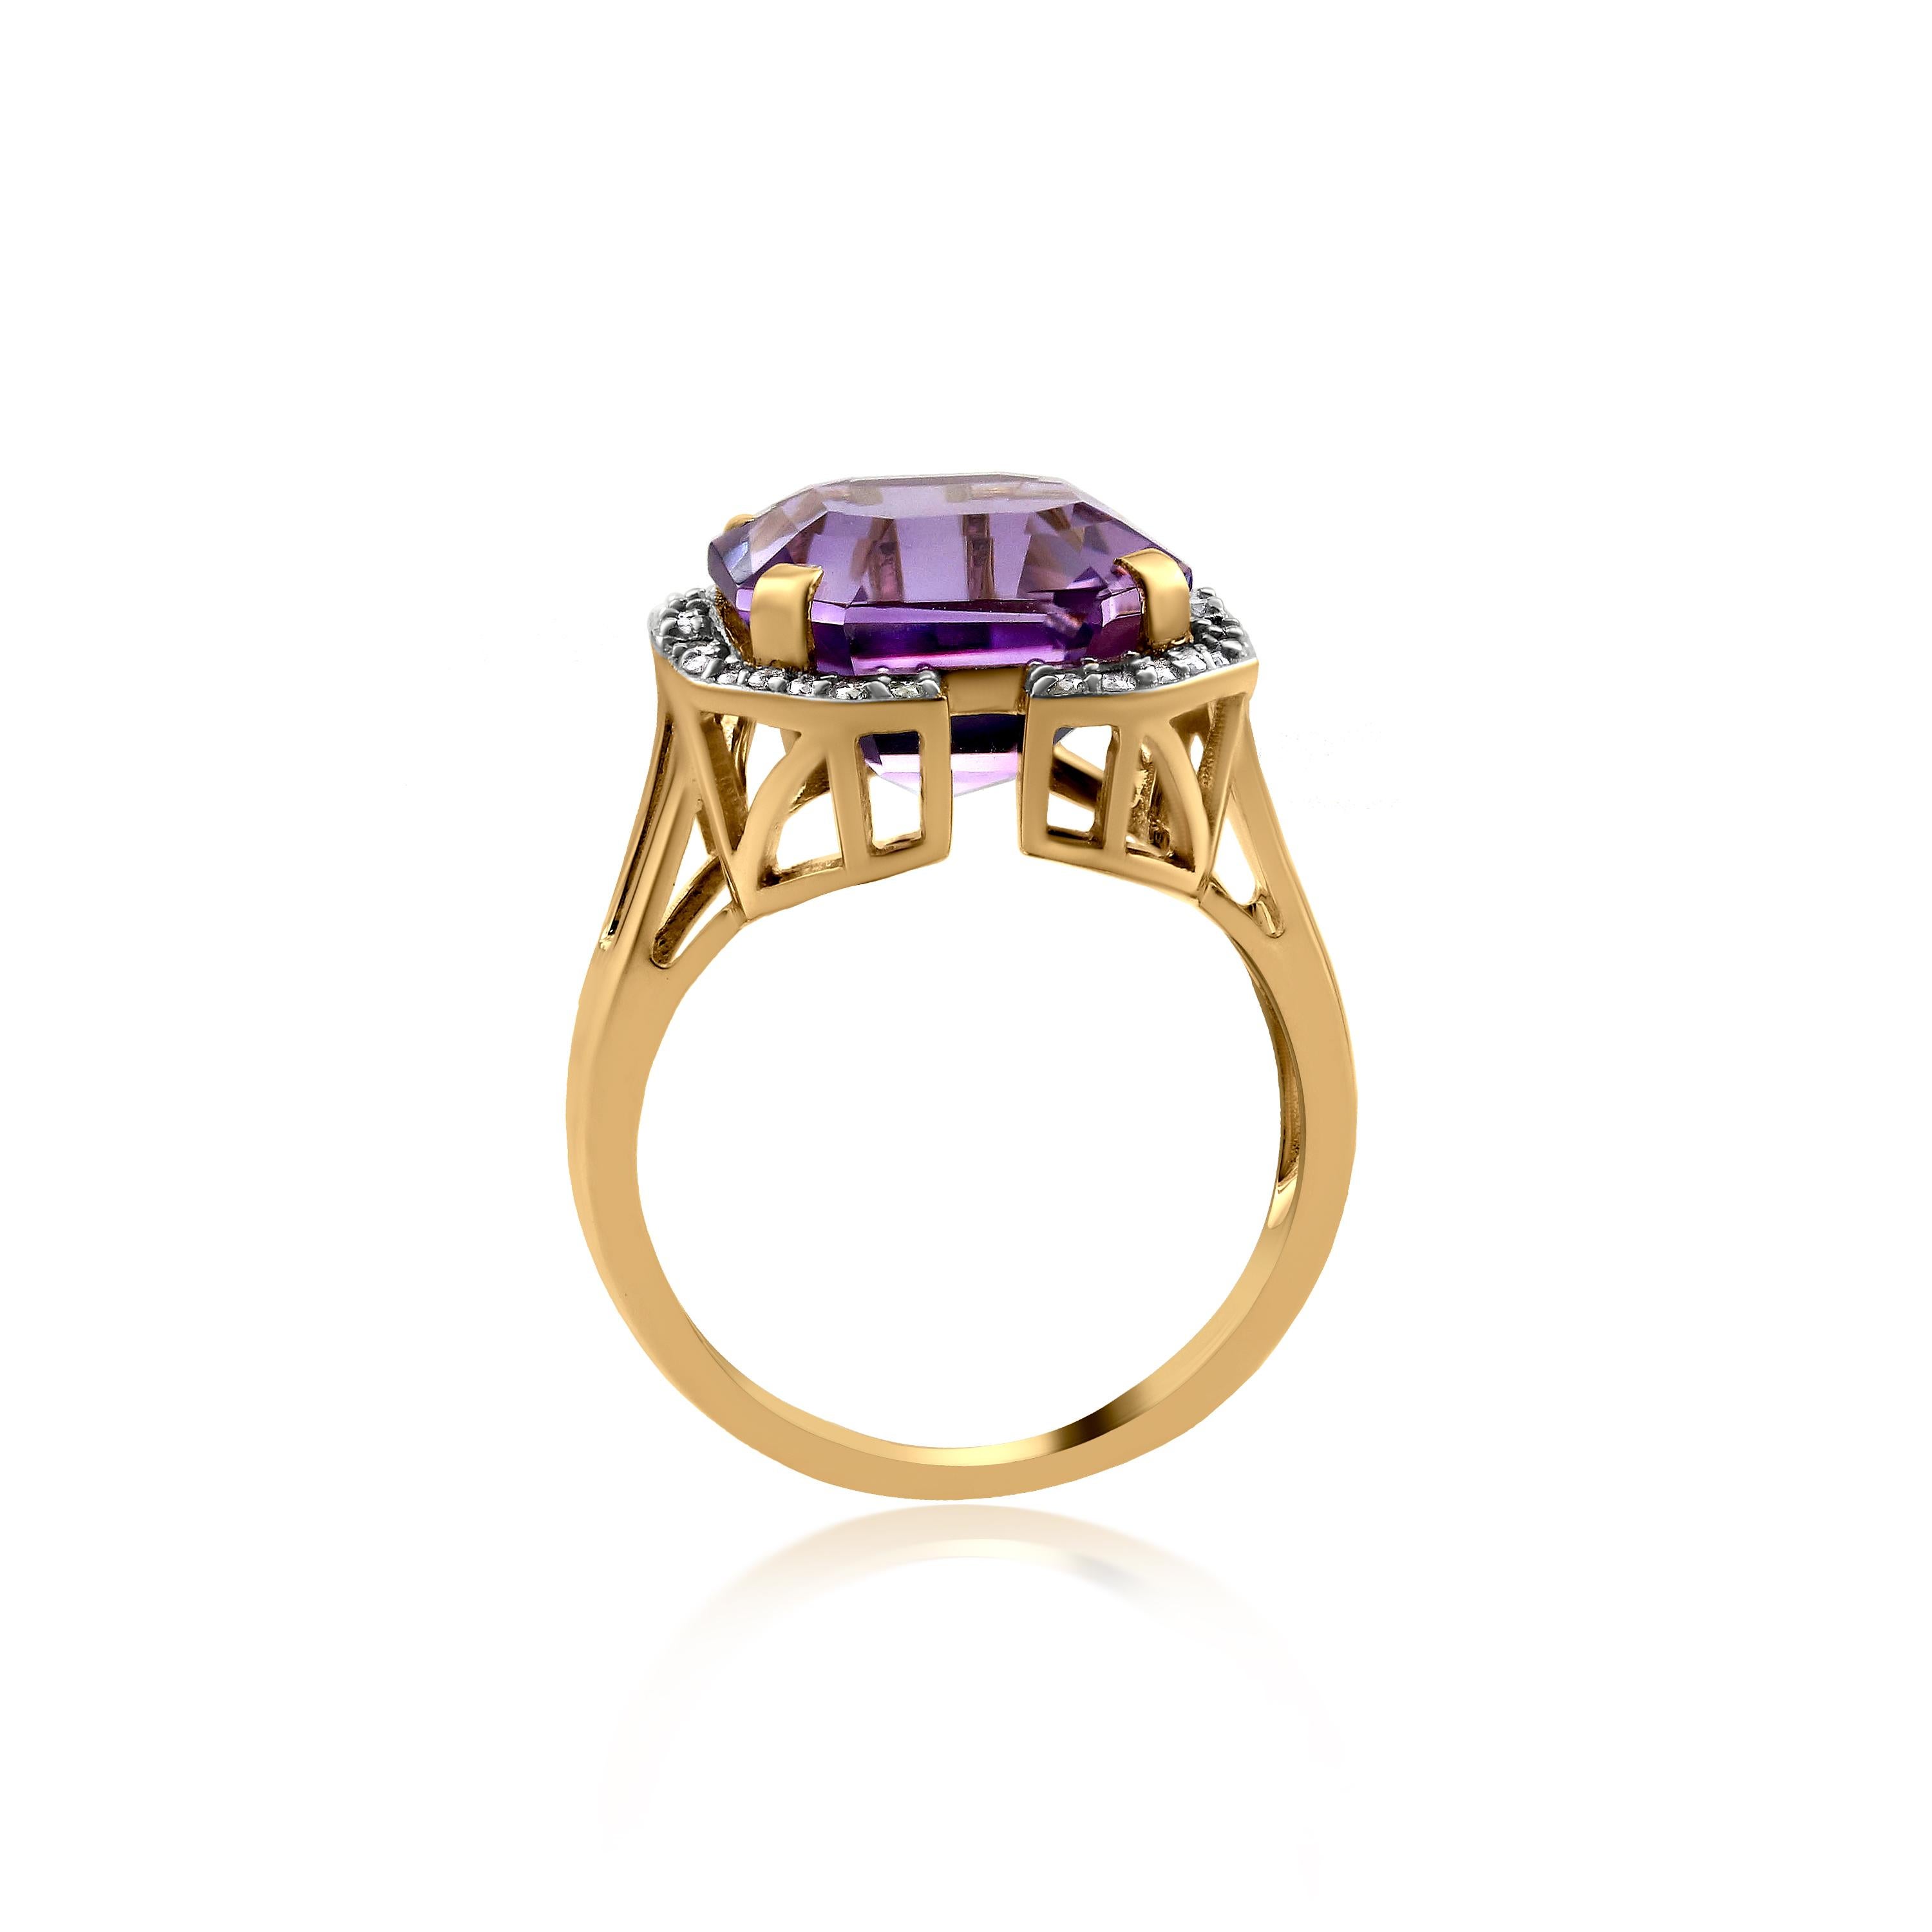 Contemporary Gemistry 7.6 Carat Asscher Cut Amethyst Solitaire Ring with Diamond in 14K Gold